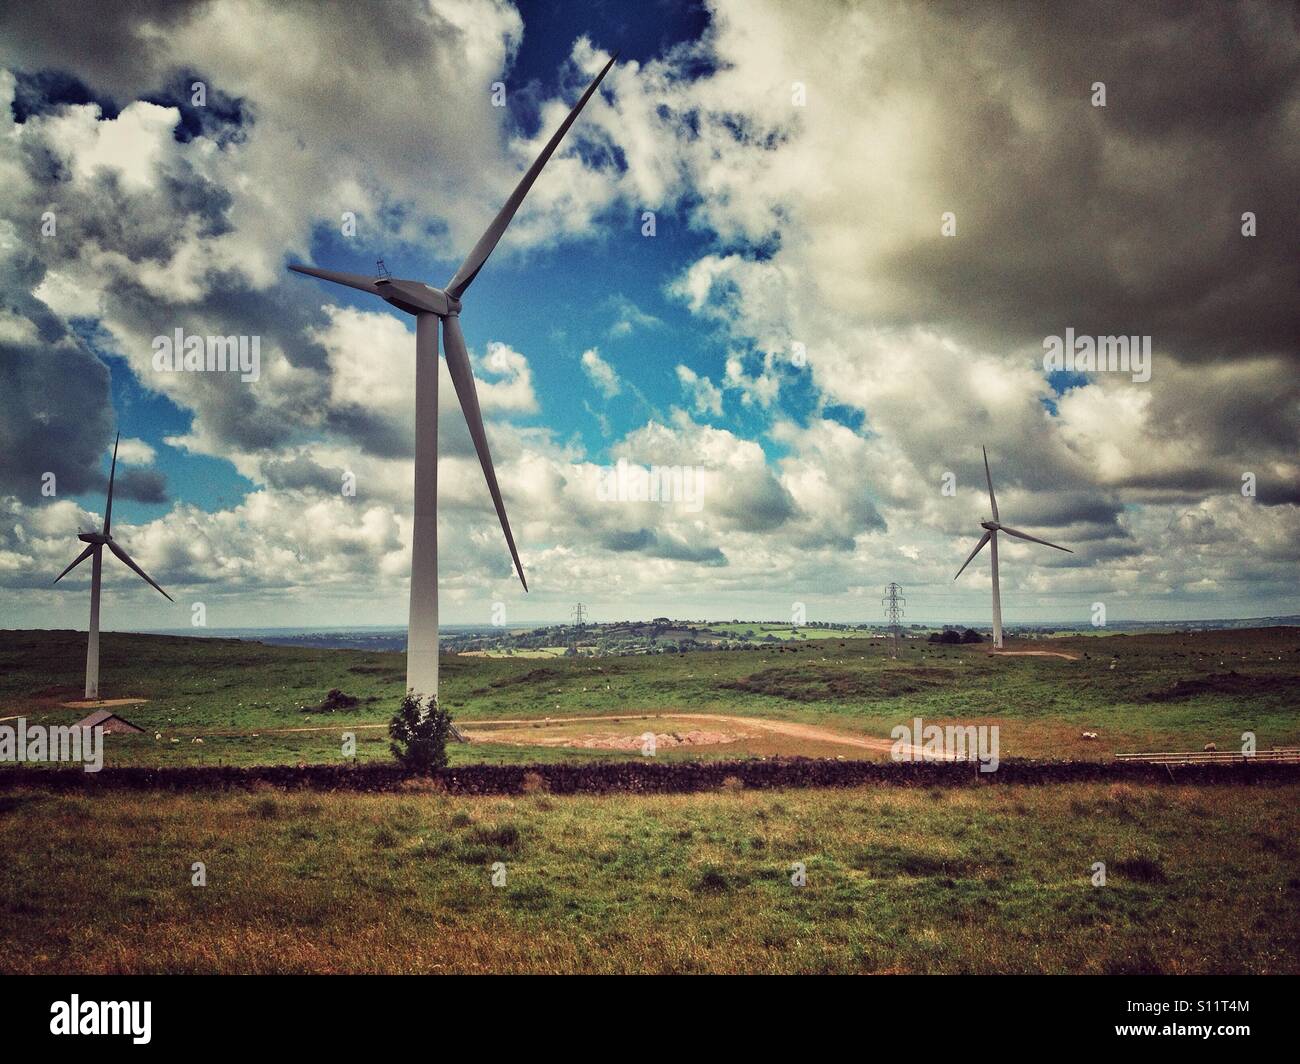 Wind turbines in uk landscape with aged filter applied. Stock Photo